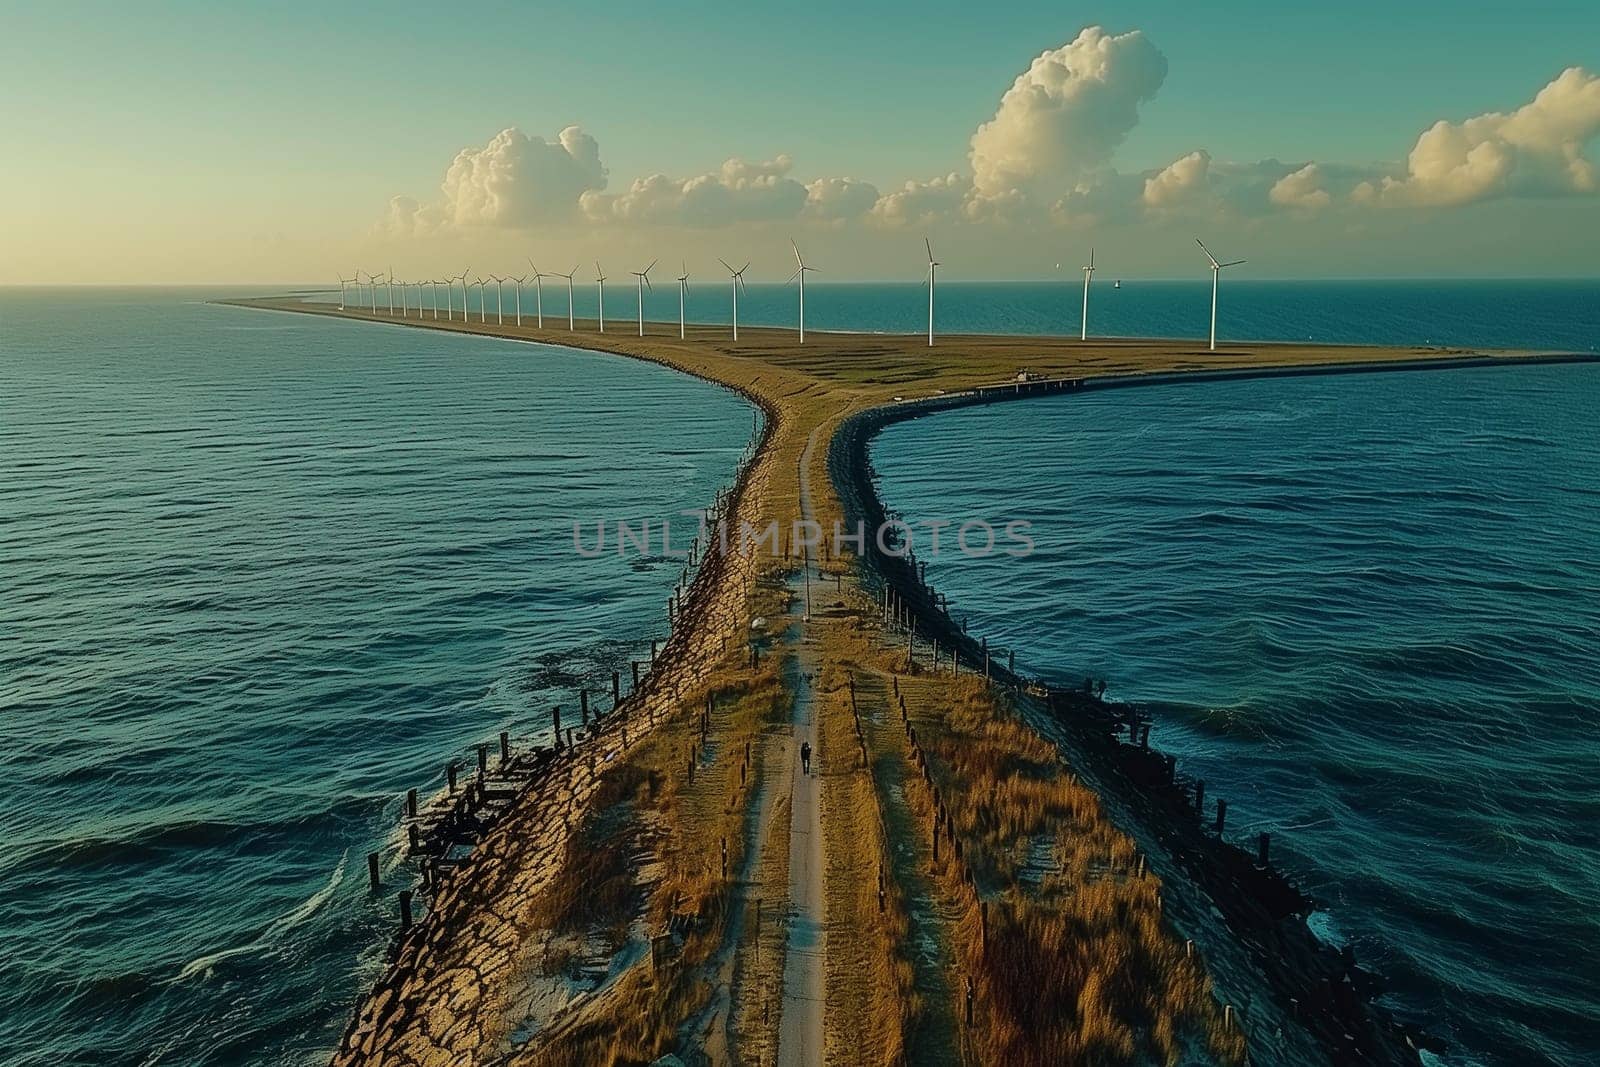 An aerial perspective of multiple wind turbines generating clean energy near the ocean.